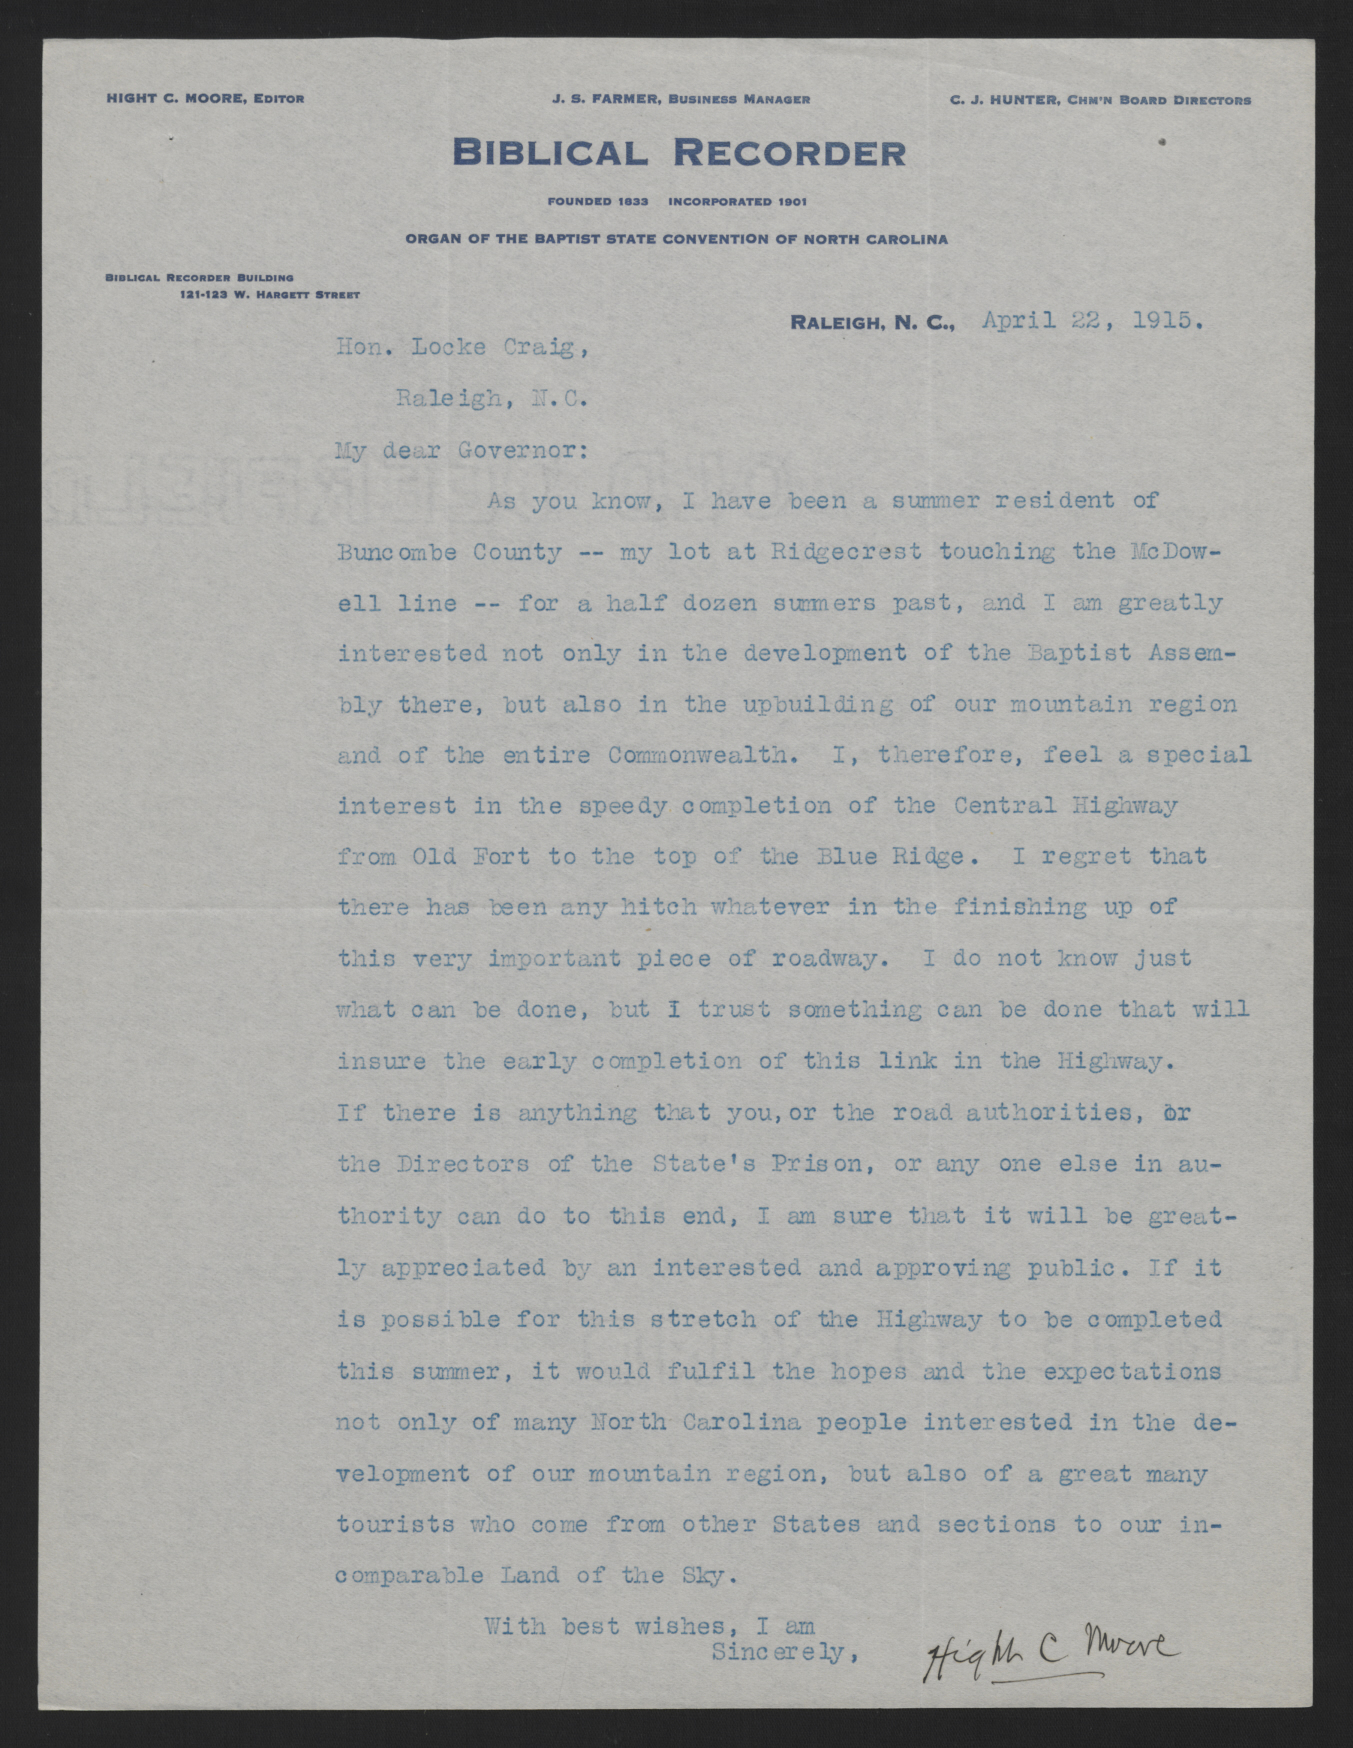 Letter from Moore to Craig, April 22, 1915